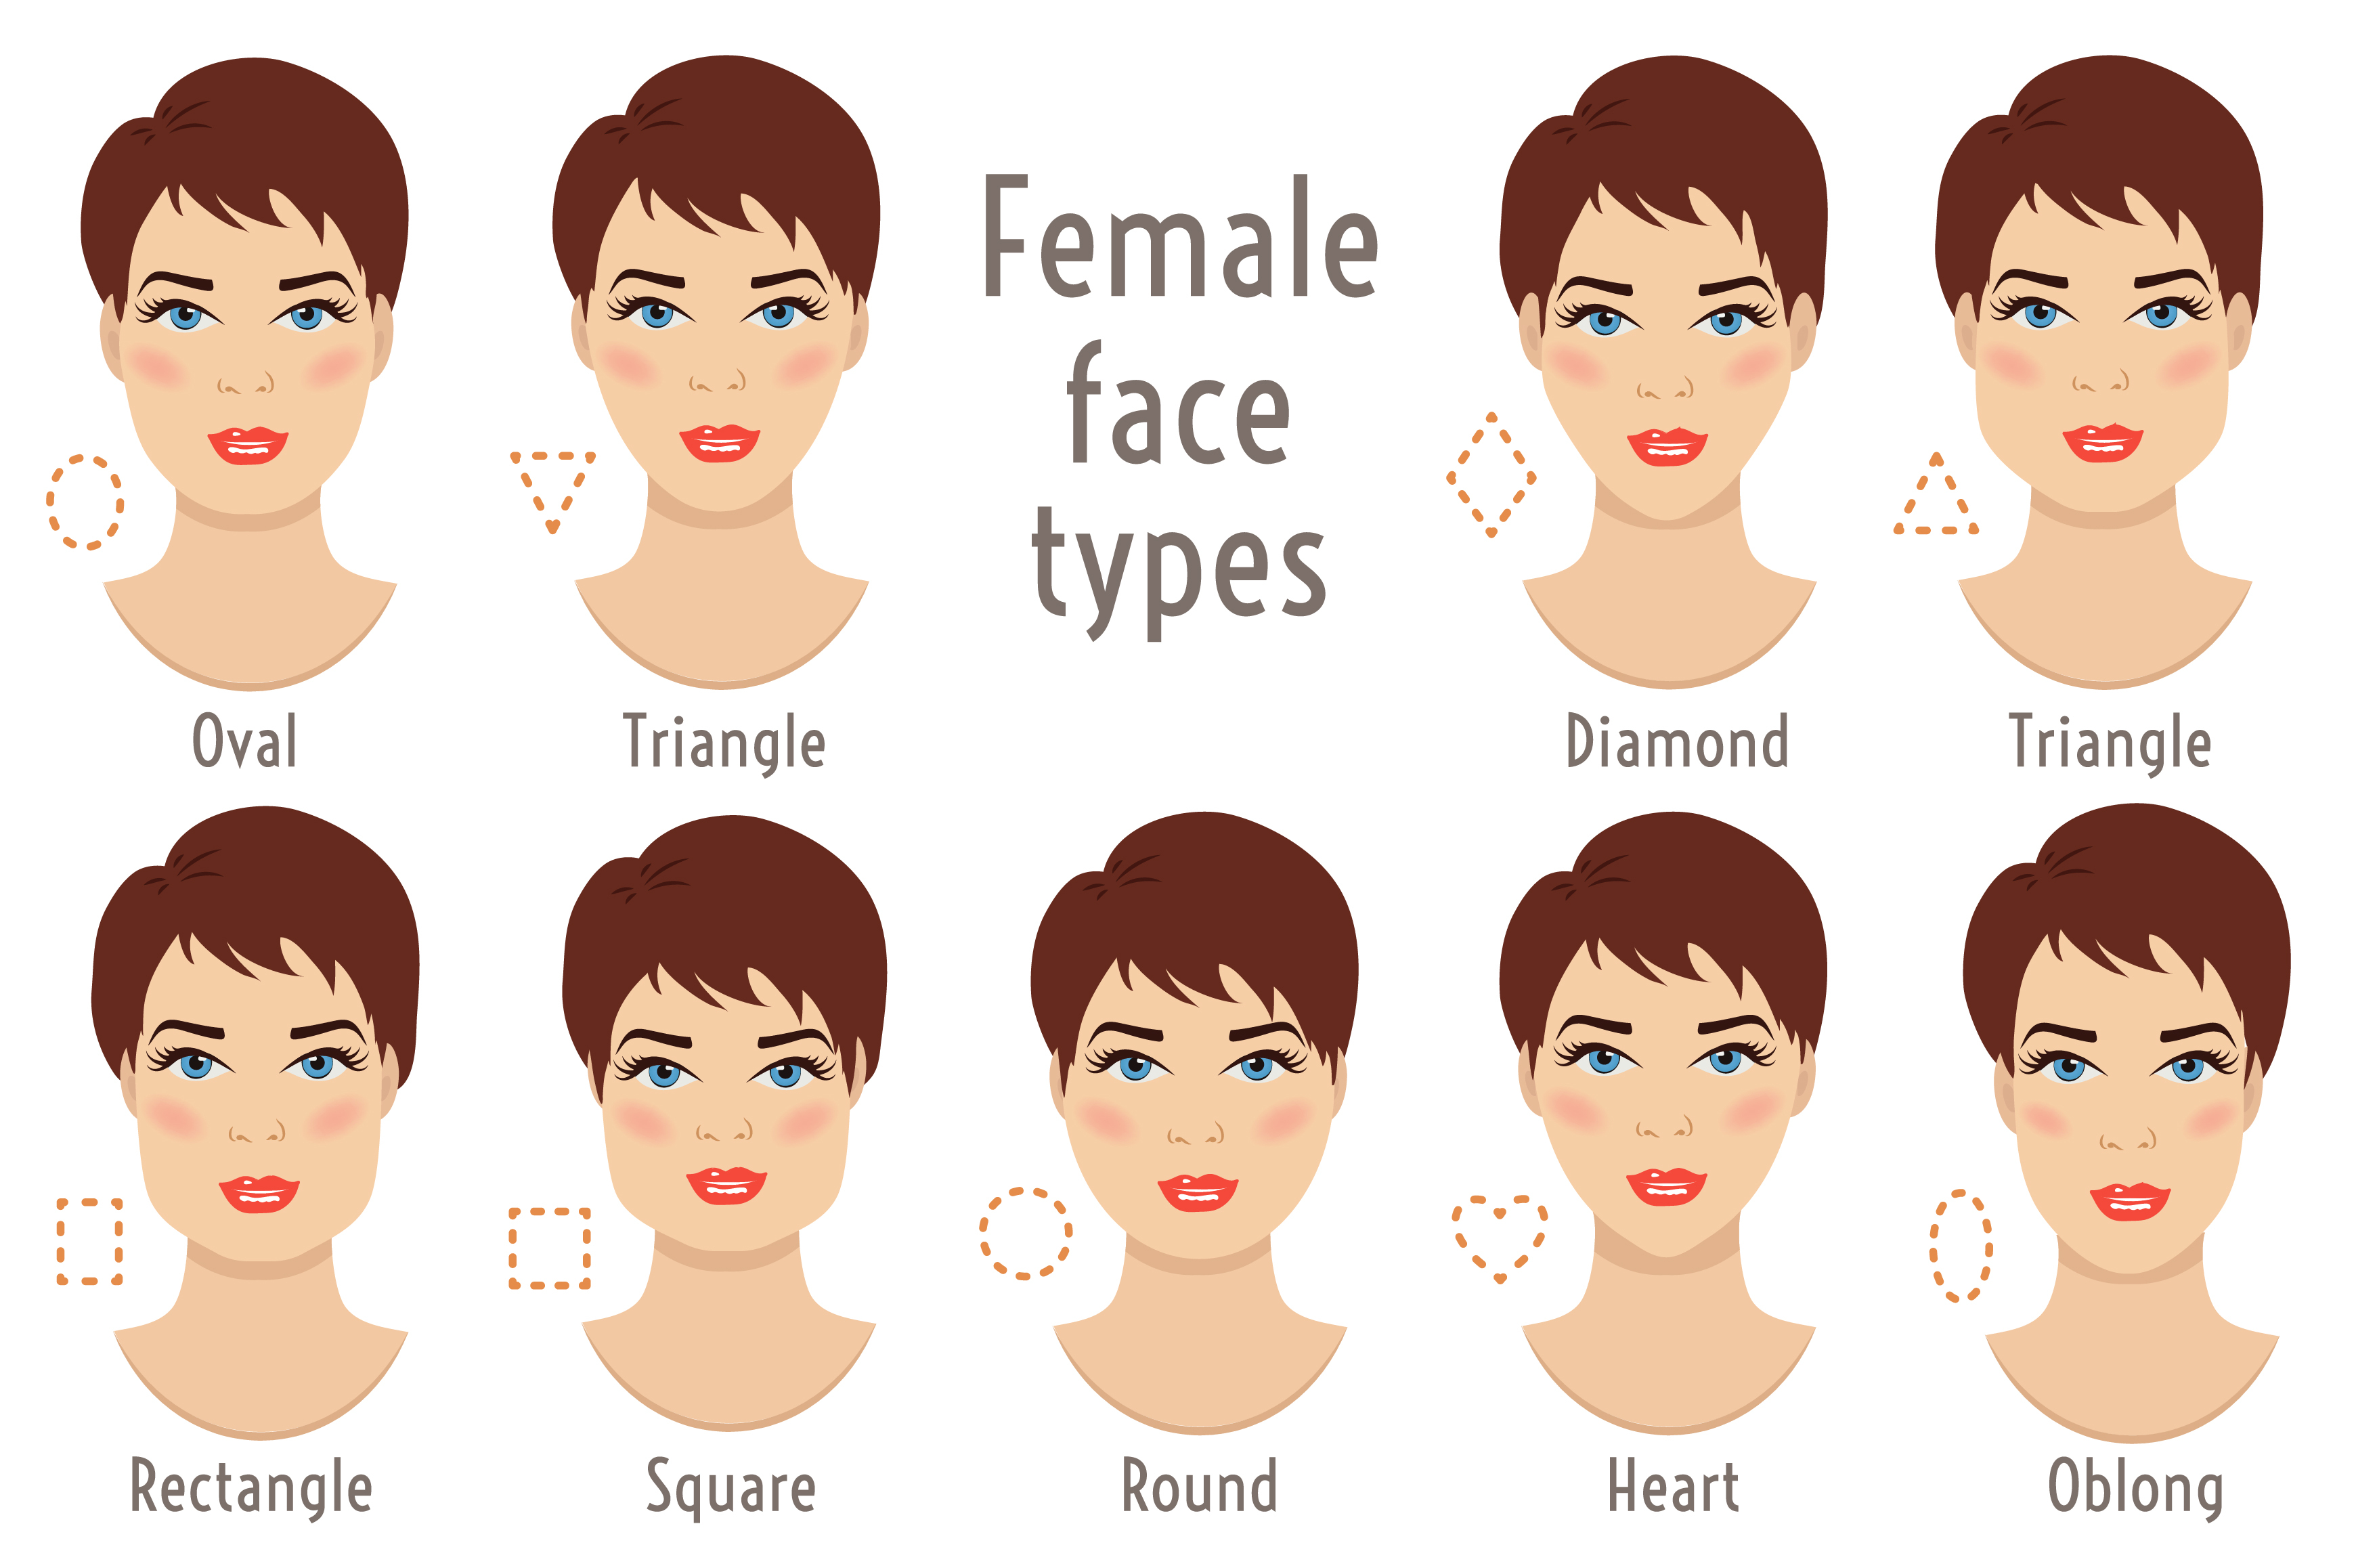 DIFFERENT SHAPES OF FACES